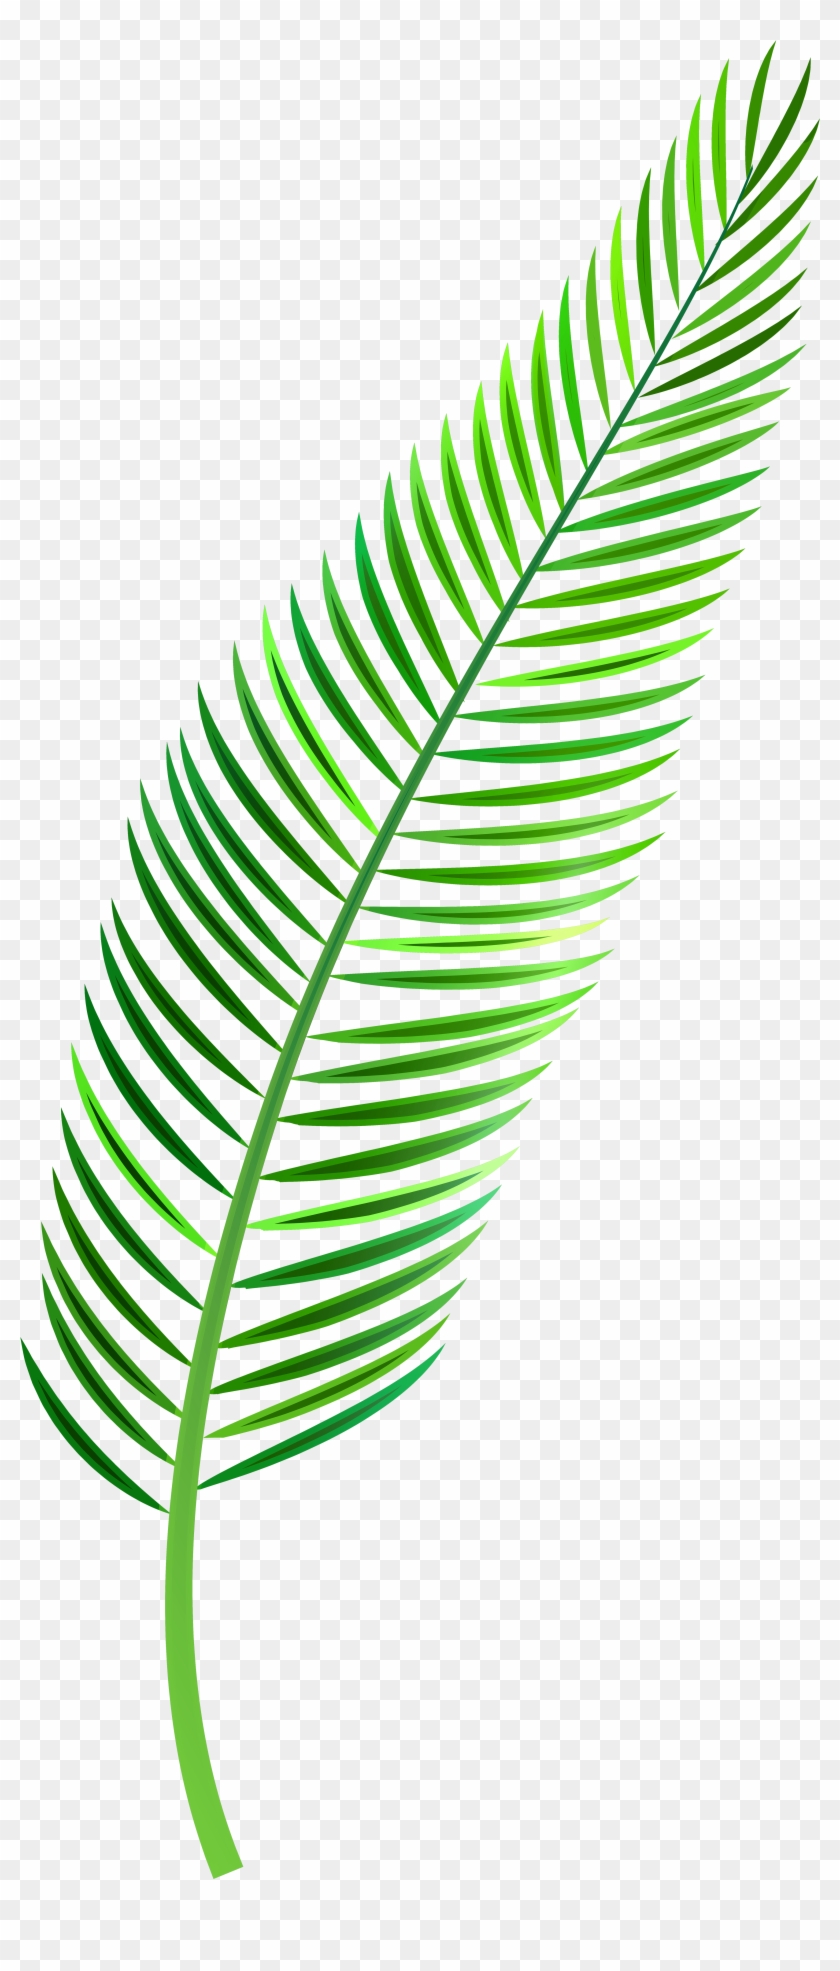 Palm Sunday Clipart - Palm Leaf Watercolor Png #382621